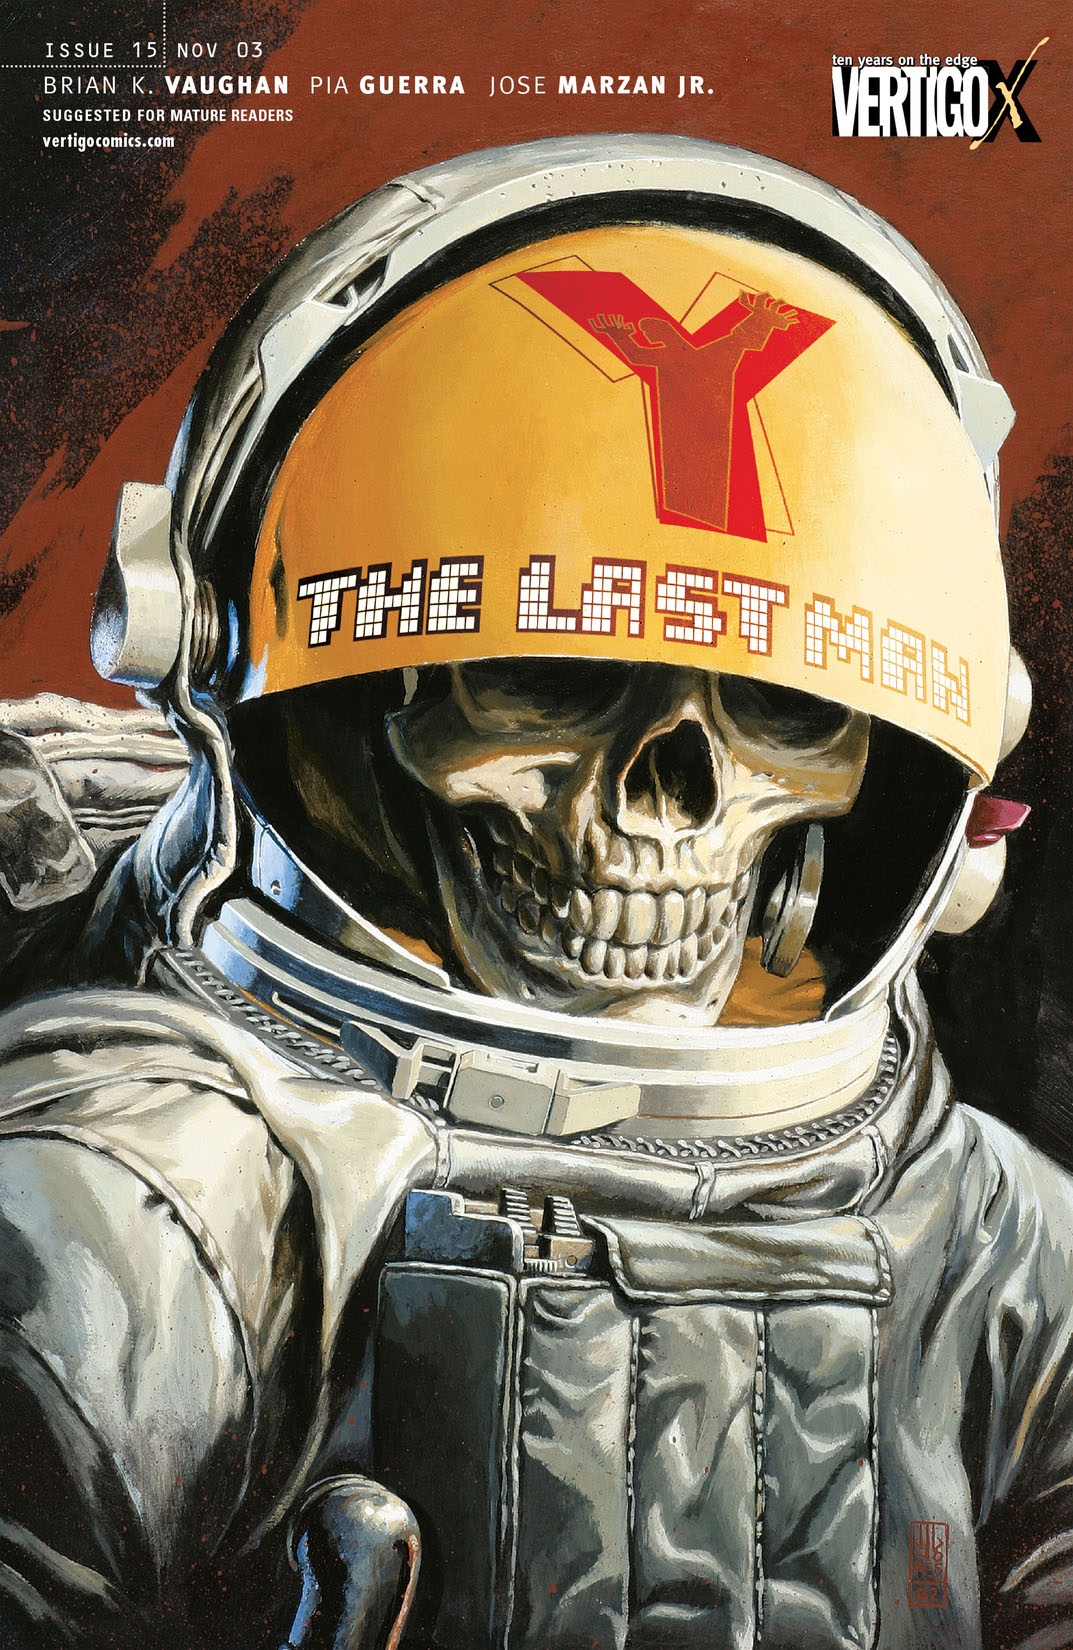 Y: The Last Man #15 preview images